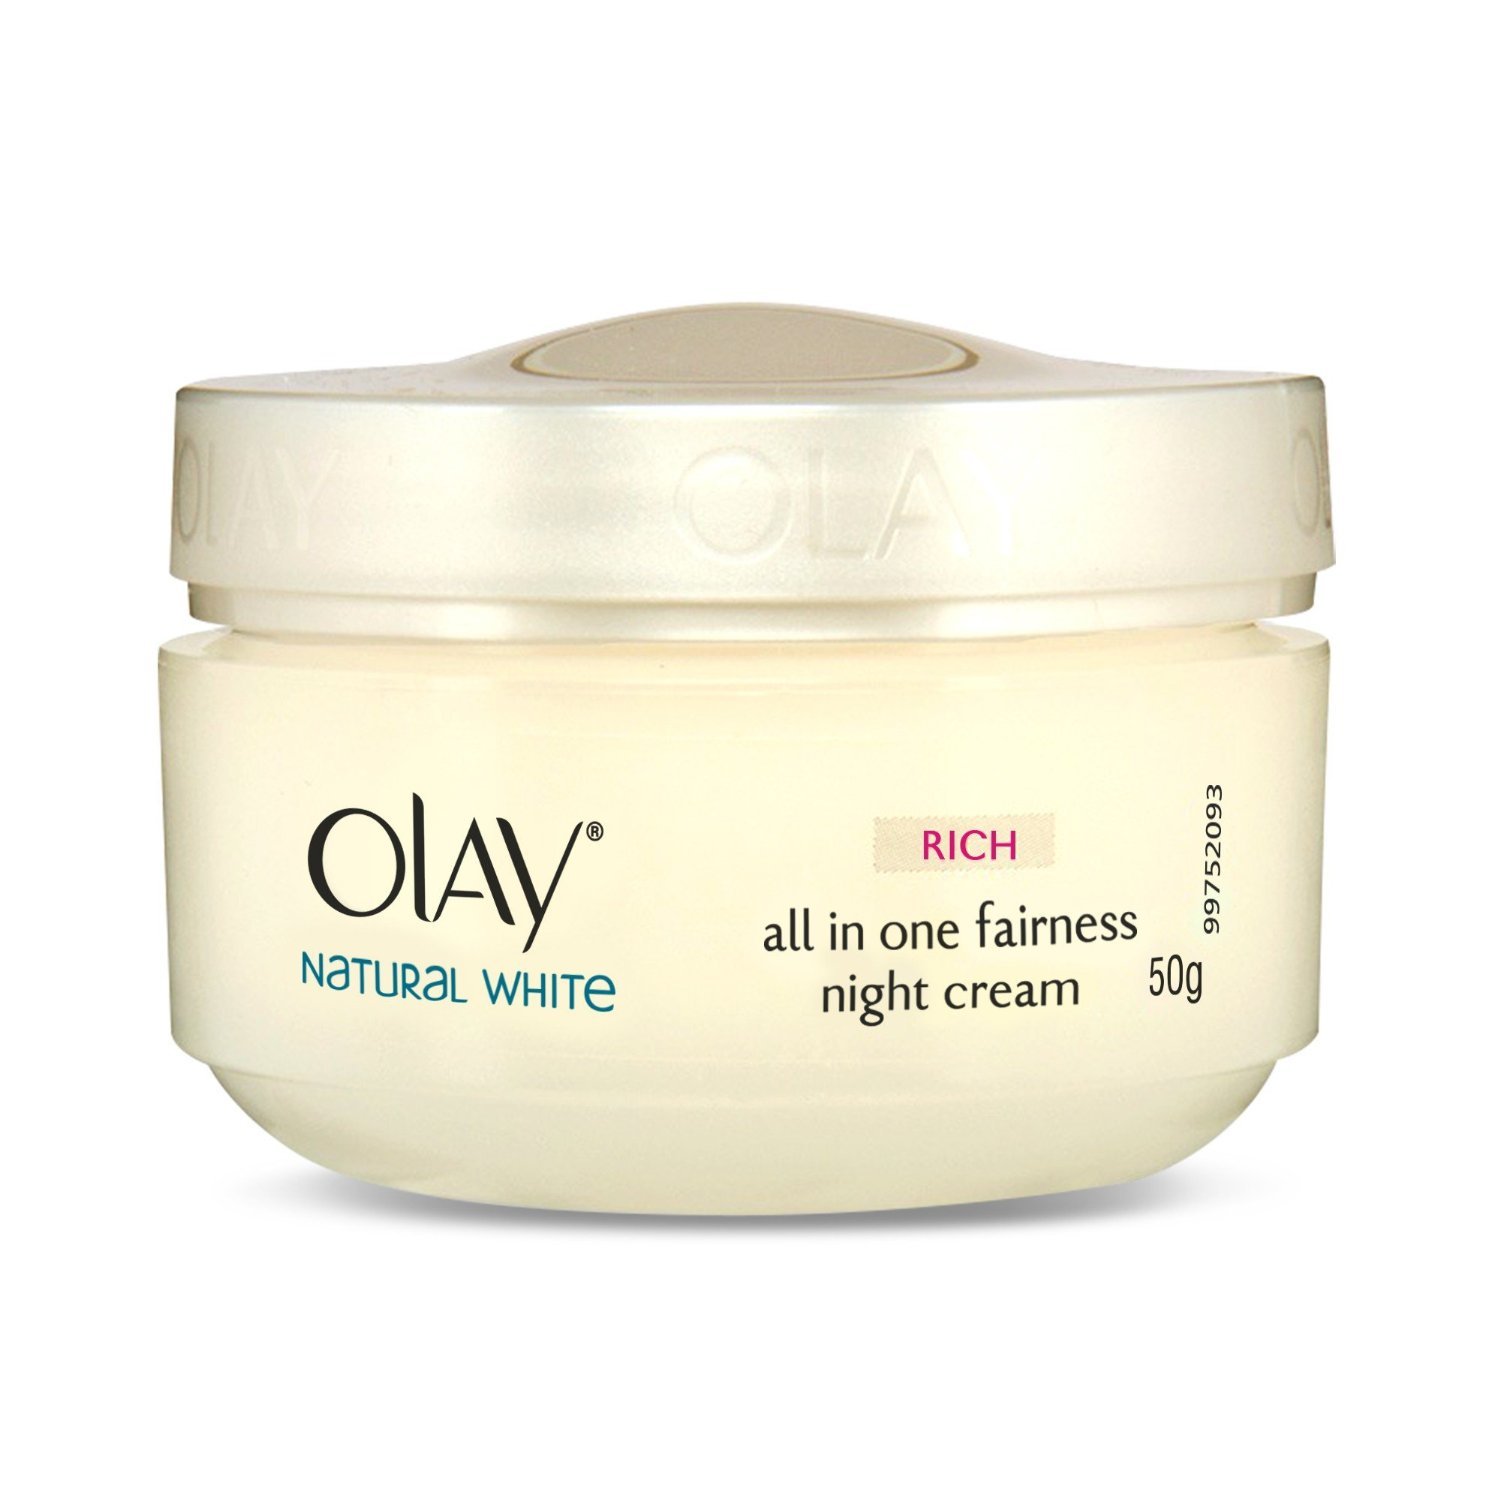 Olay Natural White All-in-One Fairness Night Cream Review